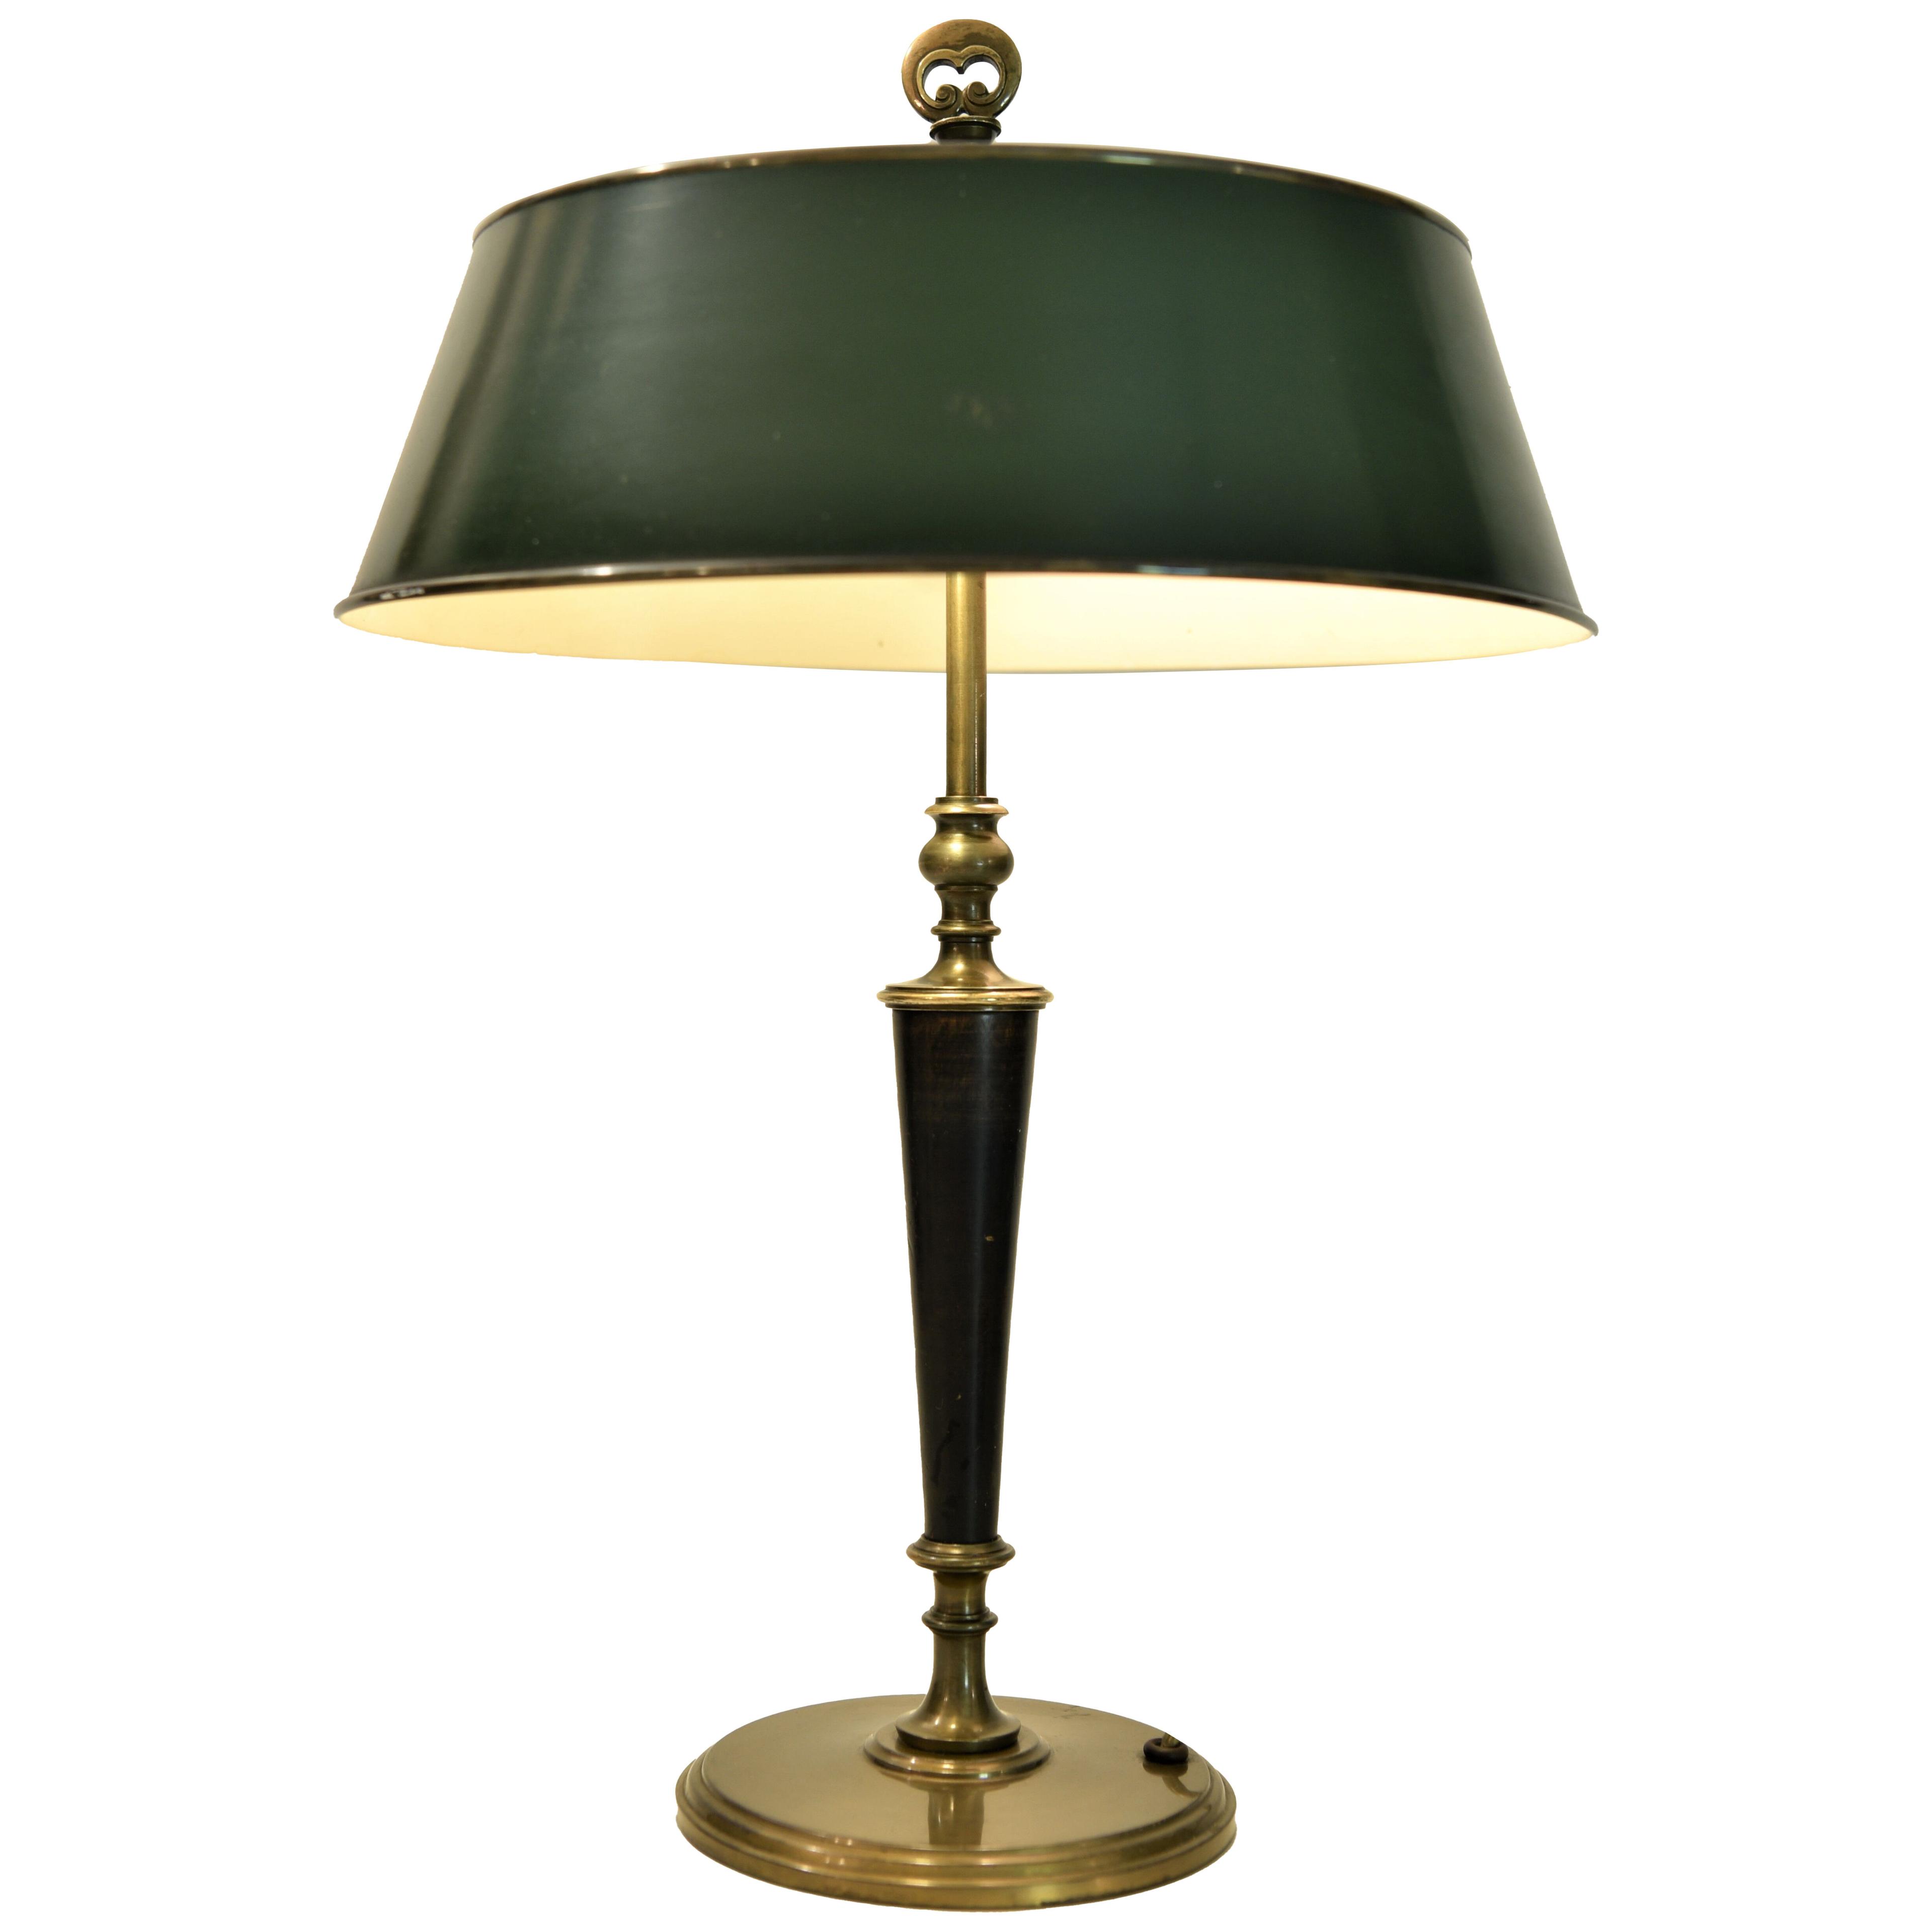 Table Lamp Made by Böhlmarks AB, Stockholm Sweden 1925